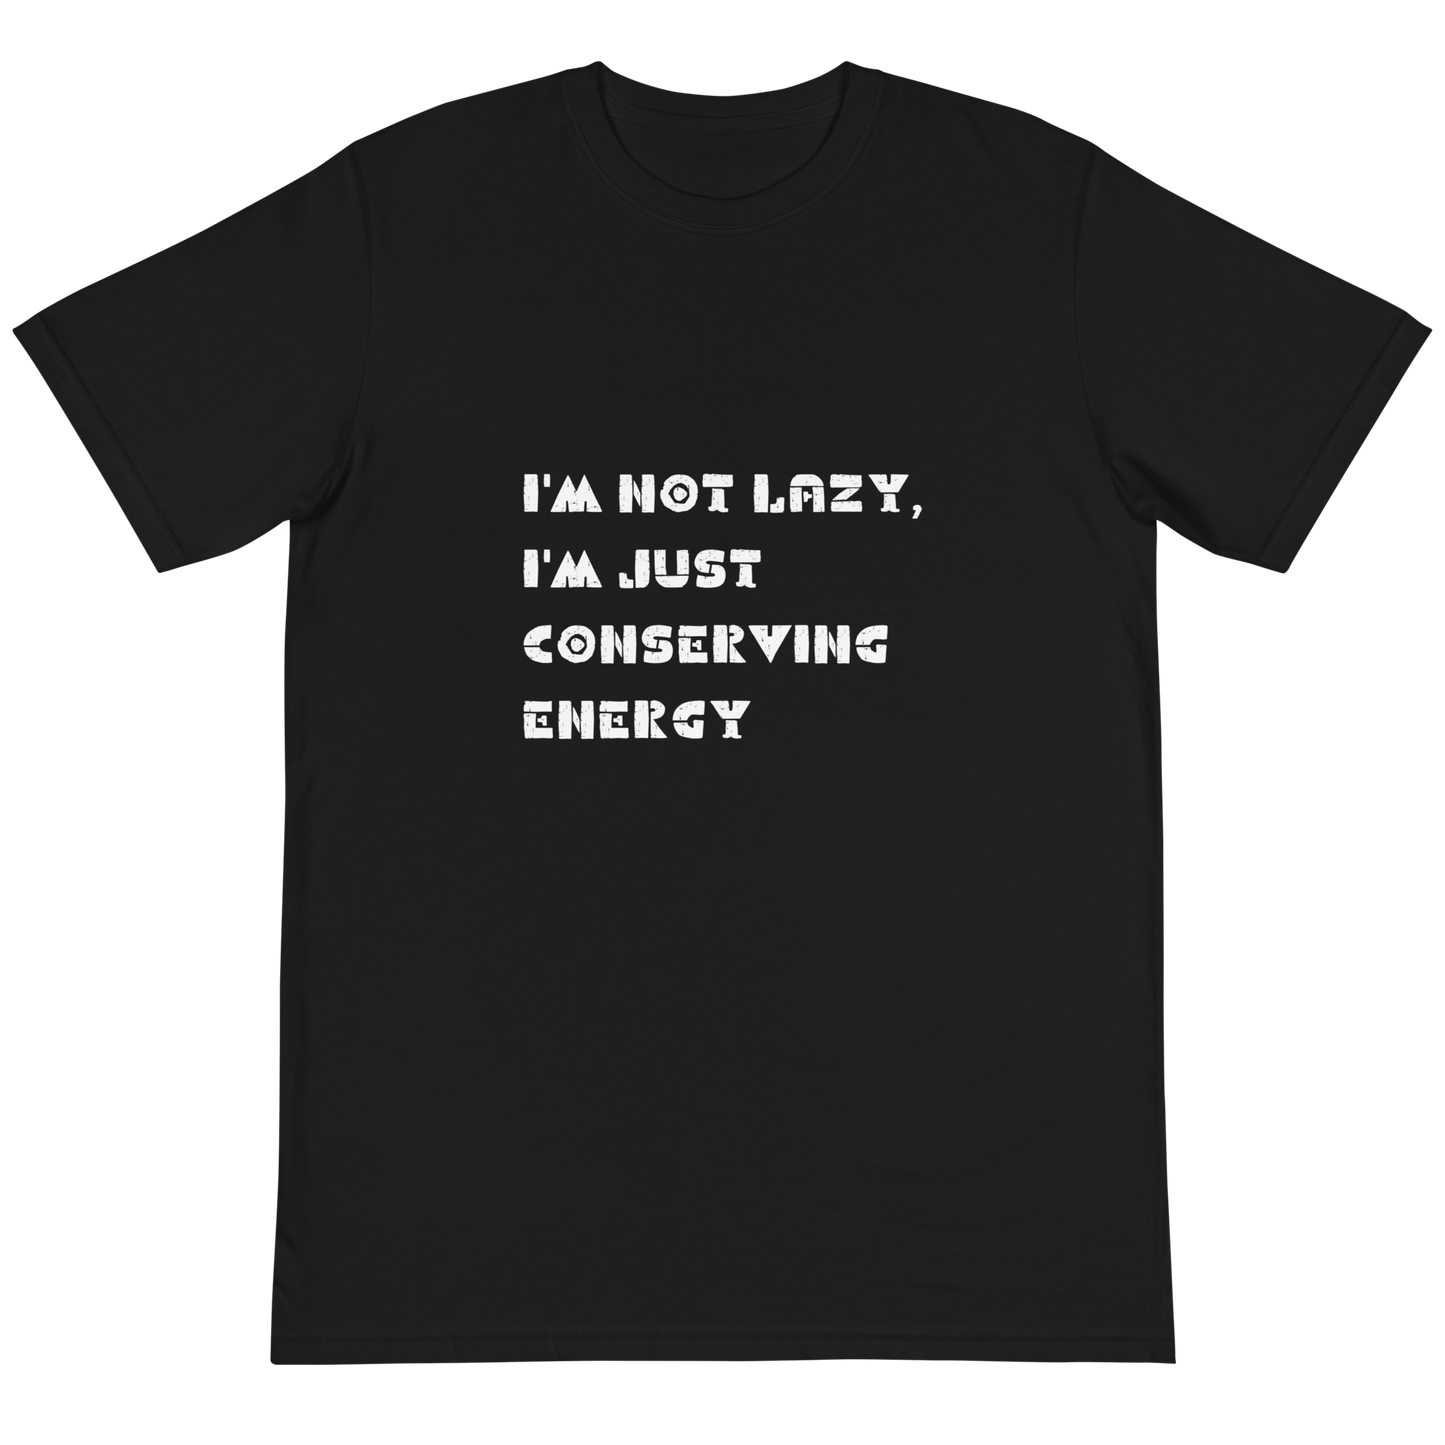 Stay Cozy and Stylish with Our 'I'm Not Lazy, I'm Just Conserving Energy' Organic Unisex T-Shirt